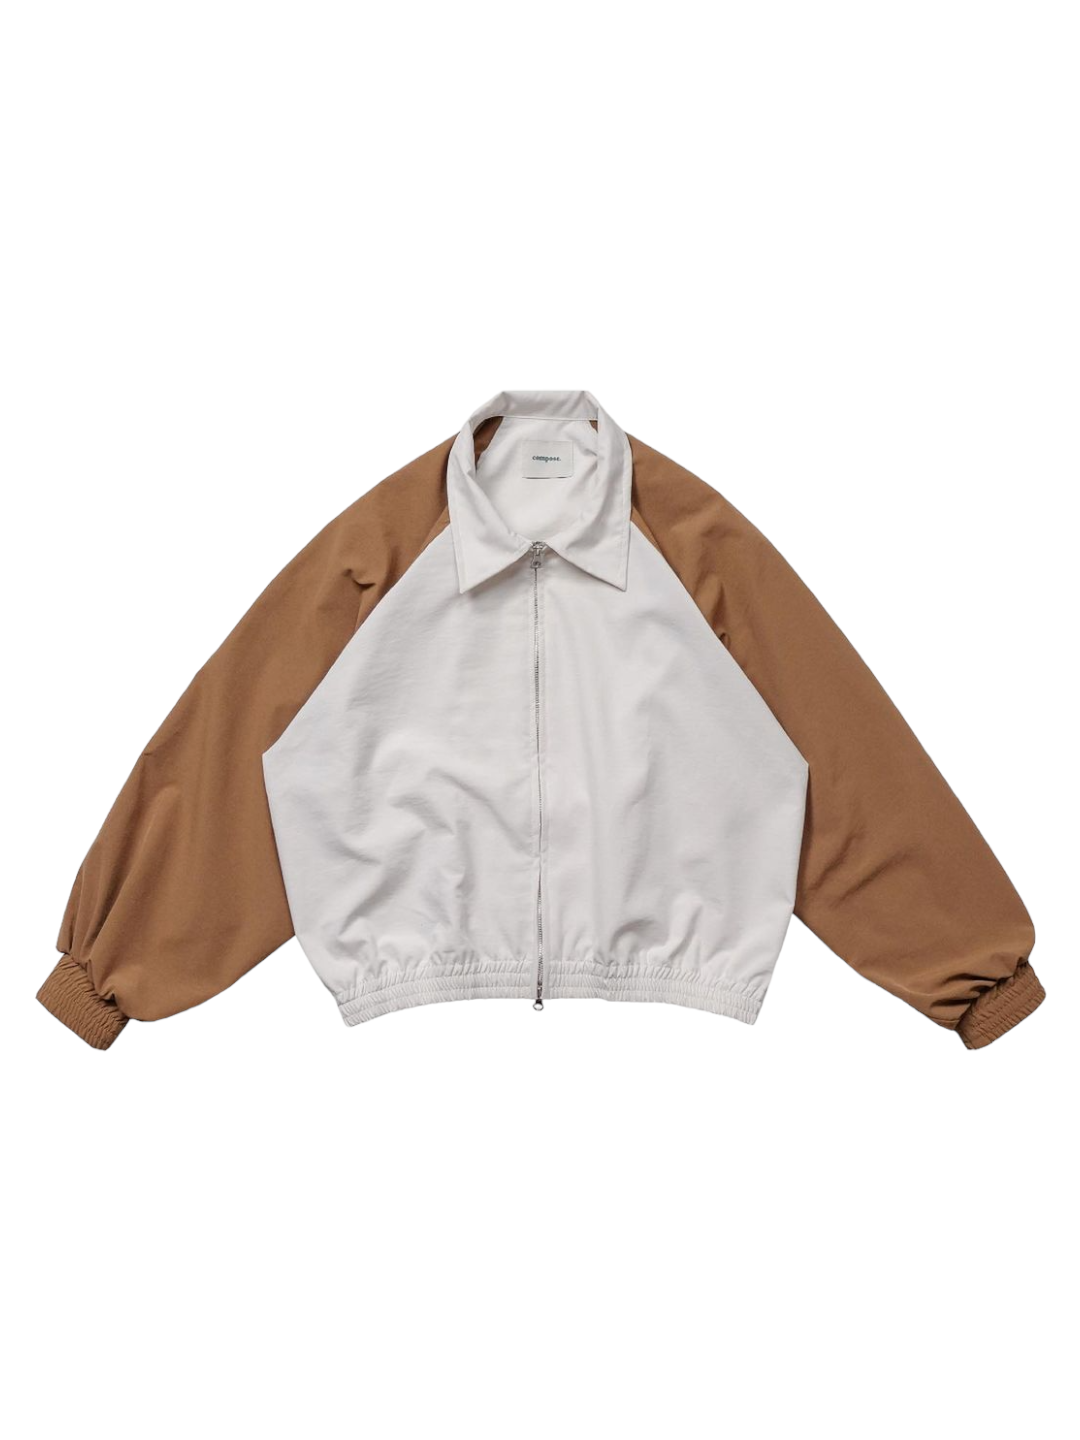 Vintage Oversized Jacket in Taupe/Brown